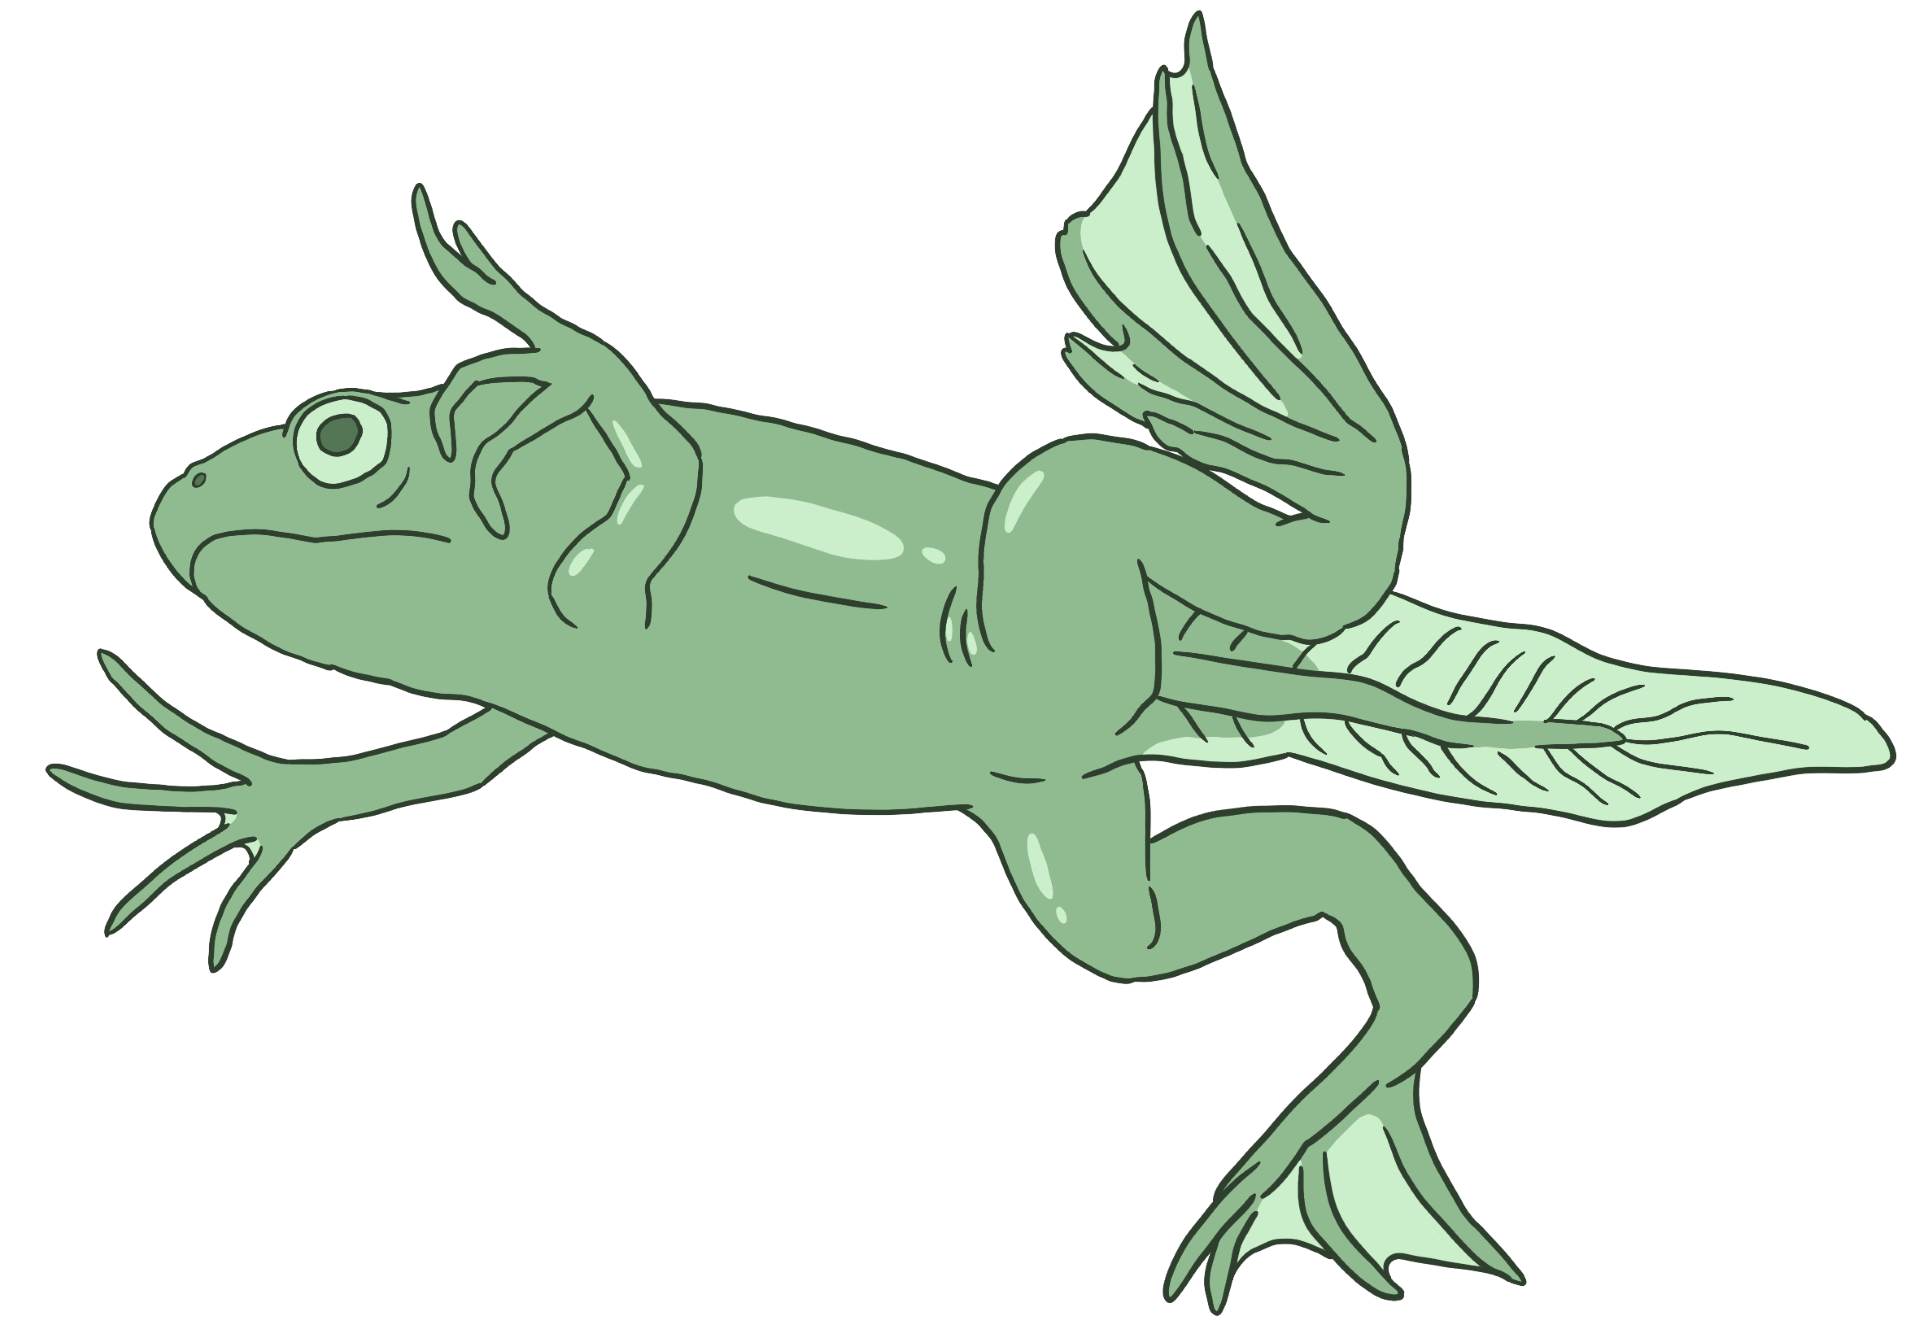 A drawing of a juvenile species of Late Jurassic frog called Rhadinosteus parvus.